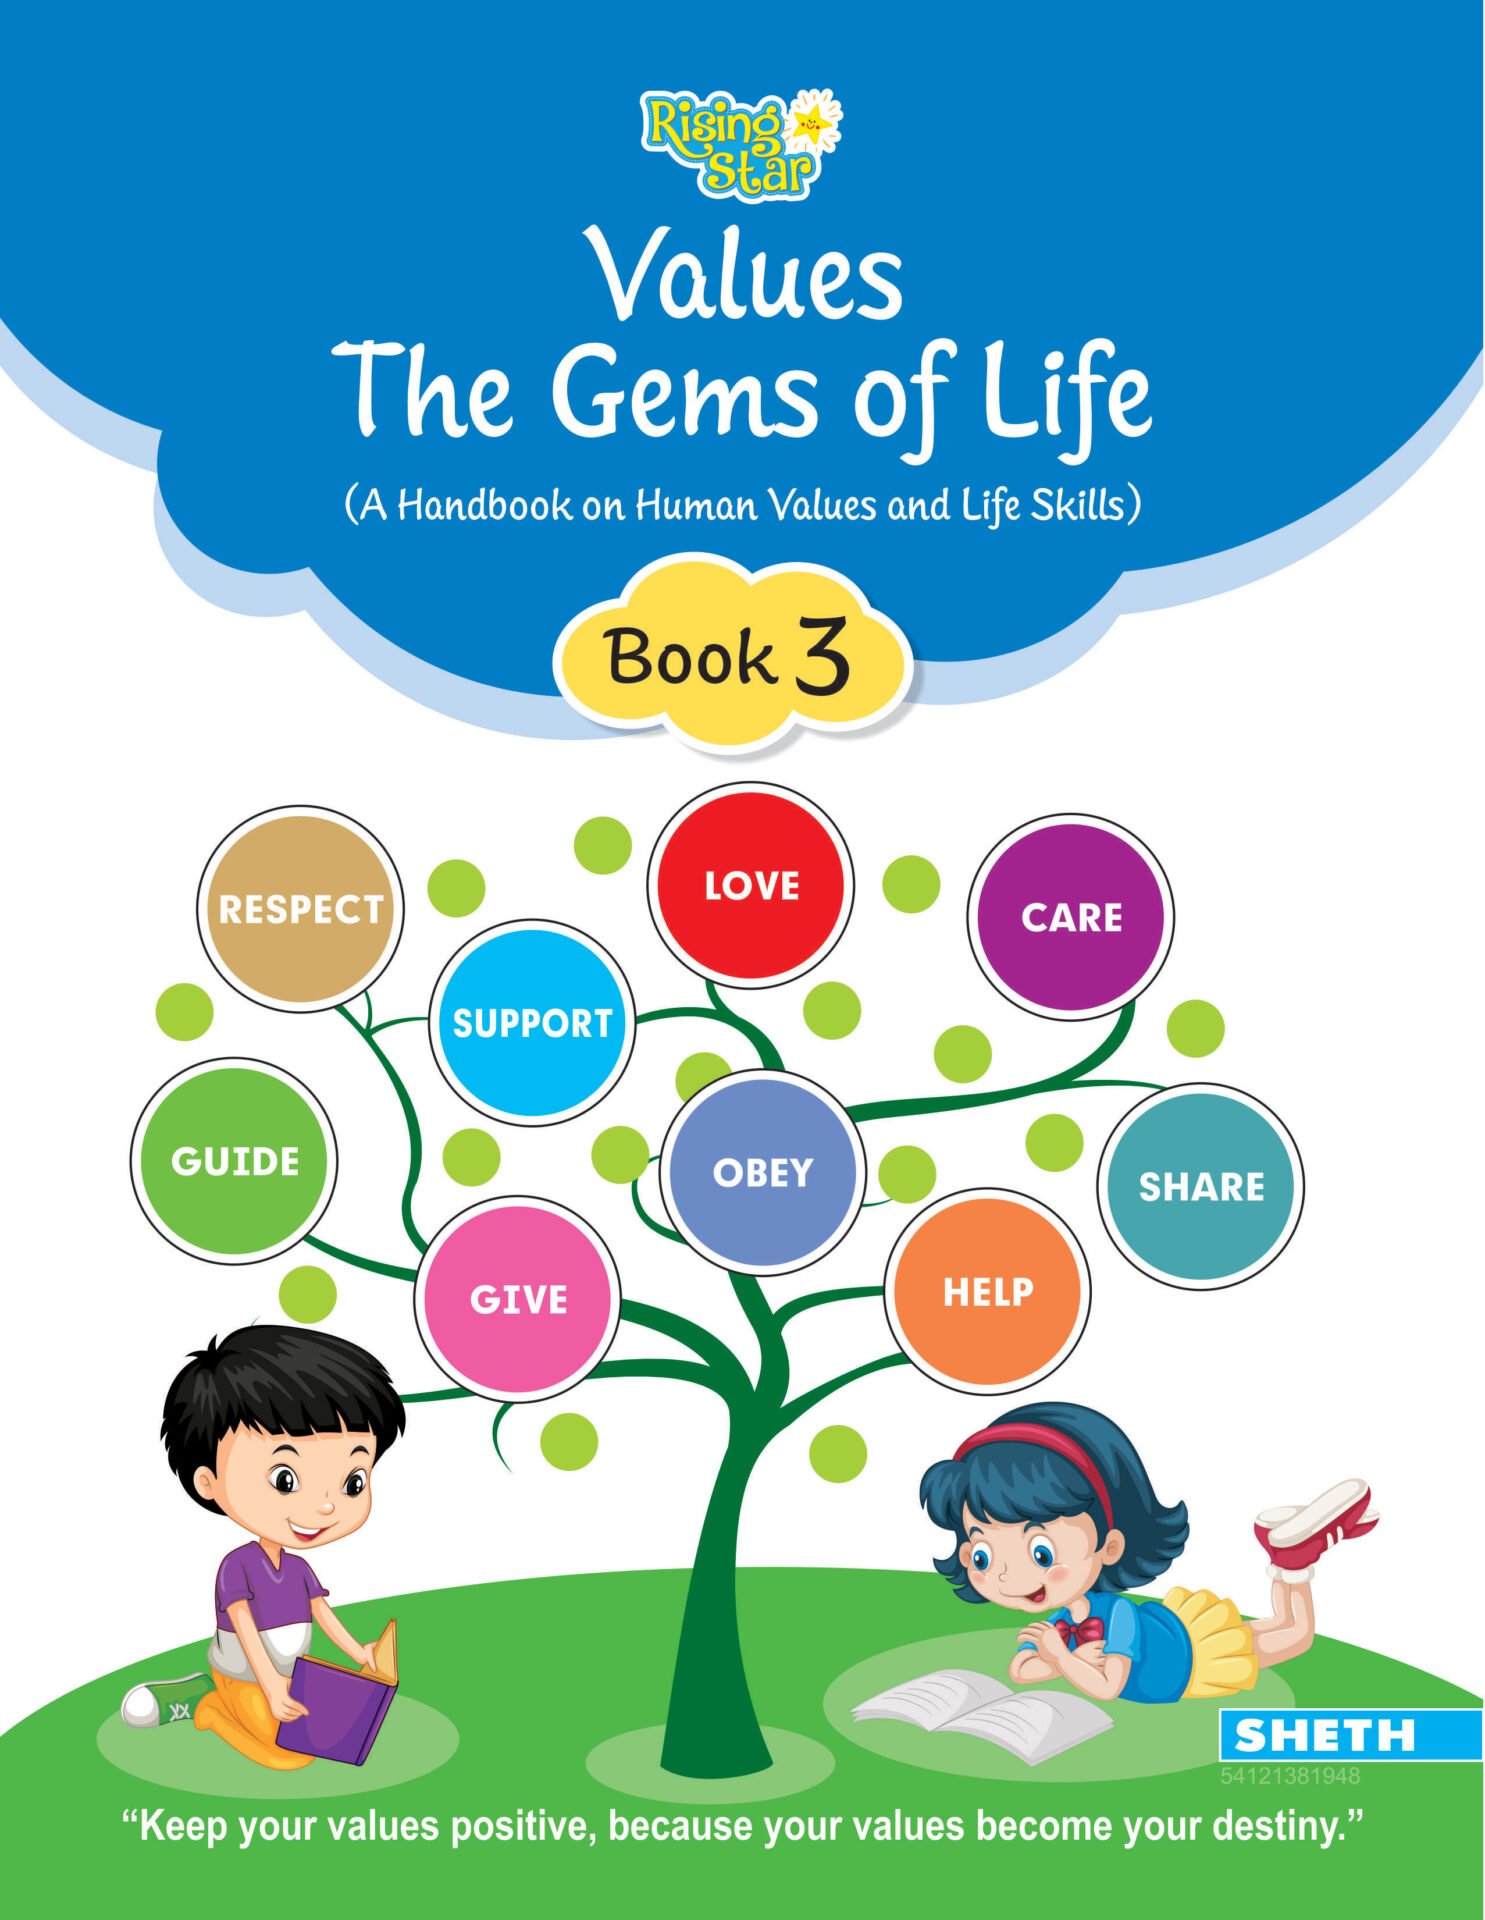 Rising Star Values The Gems of Life Book 3 1 1